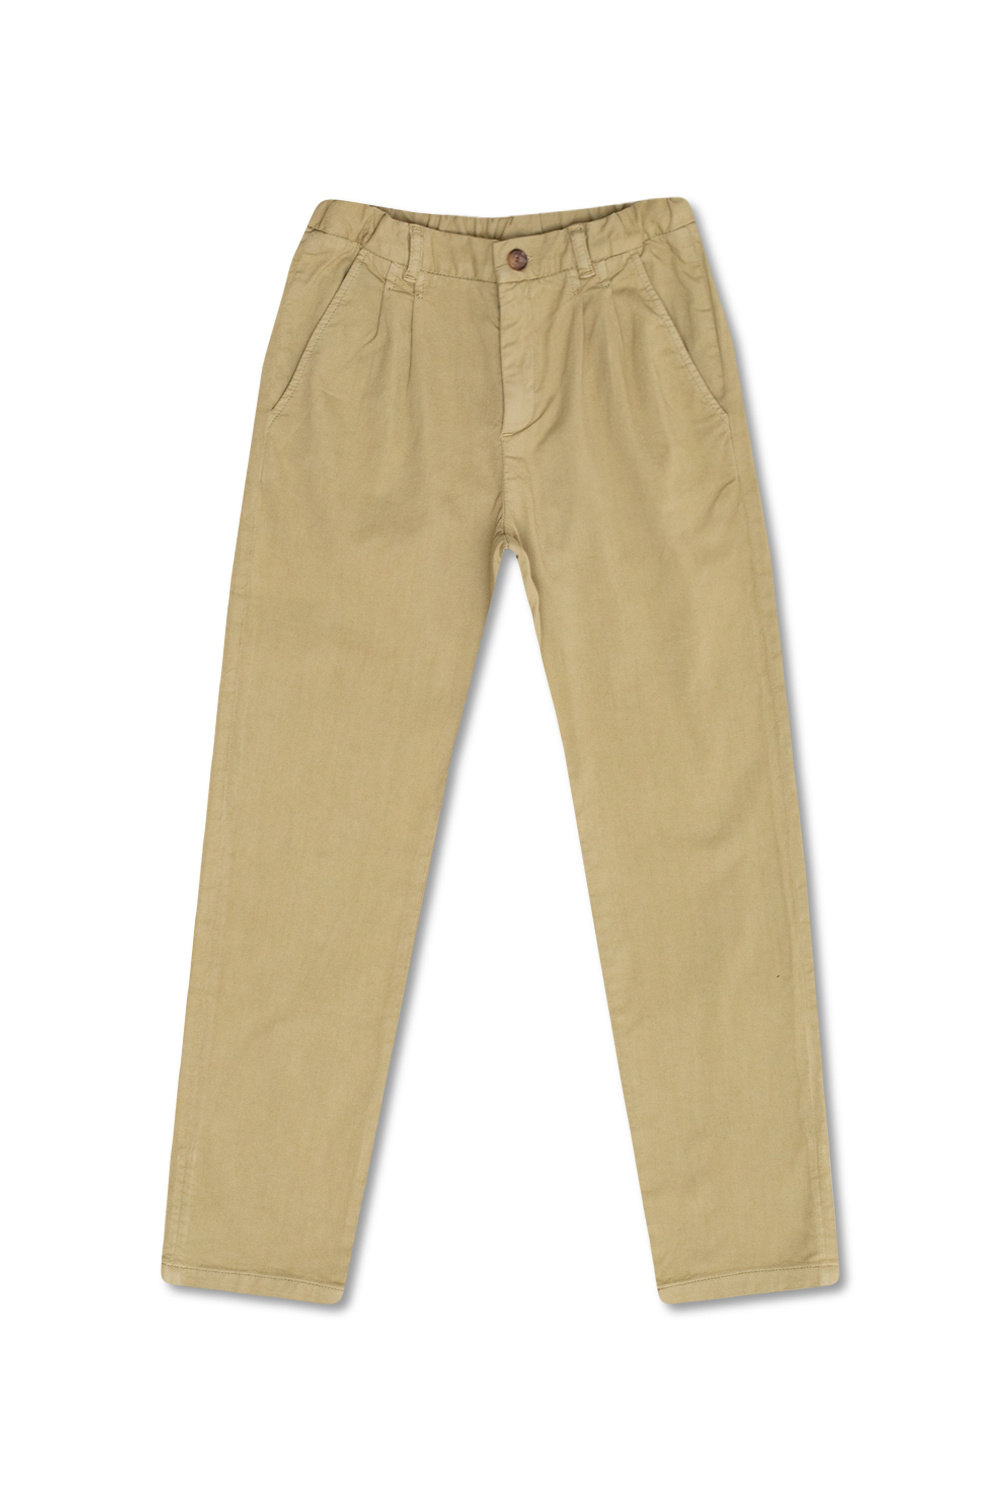 Bonpoint  Trousers with pockets